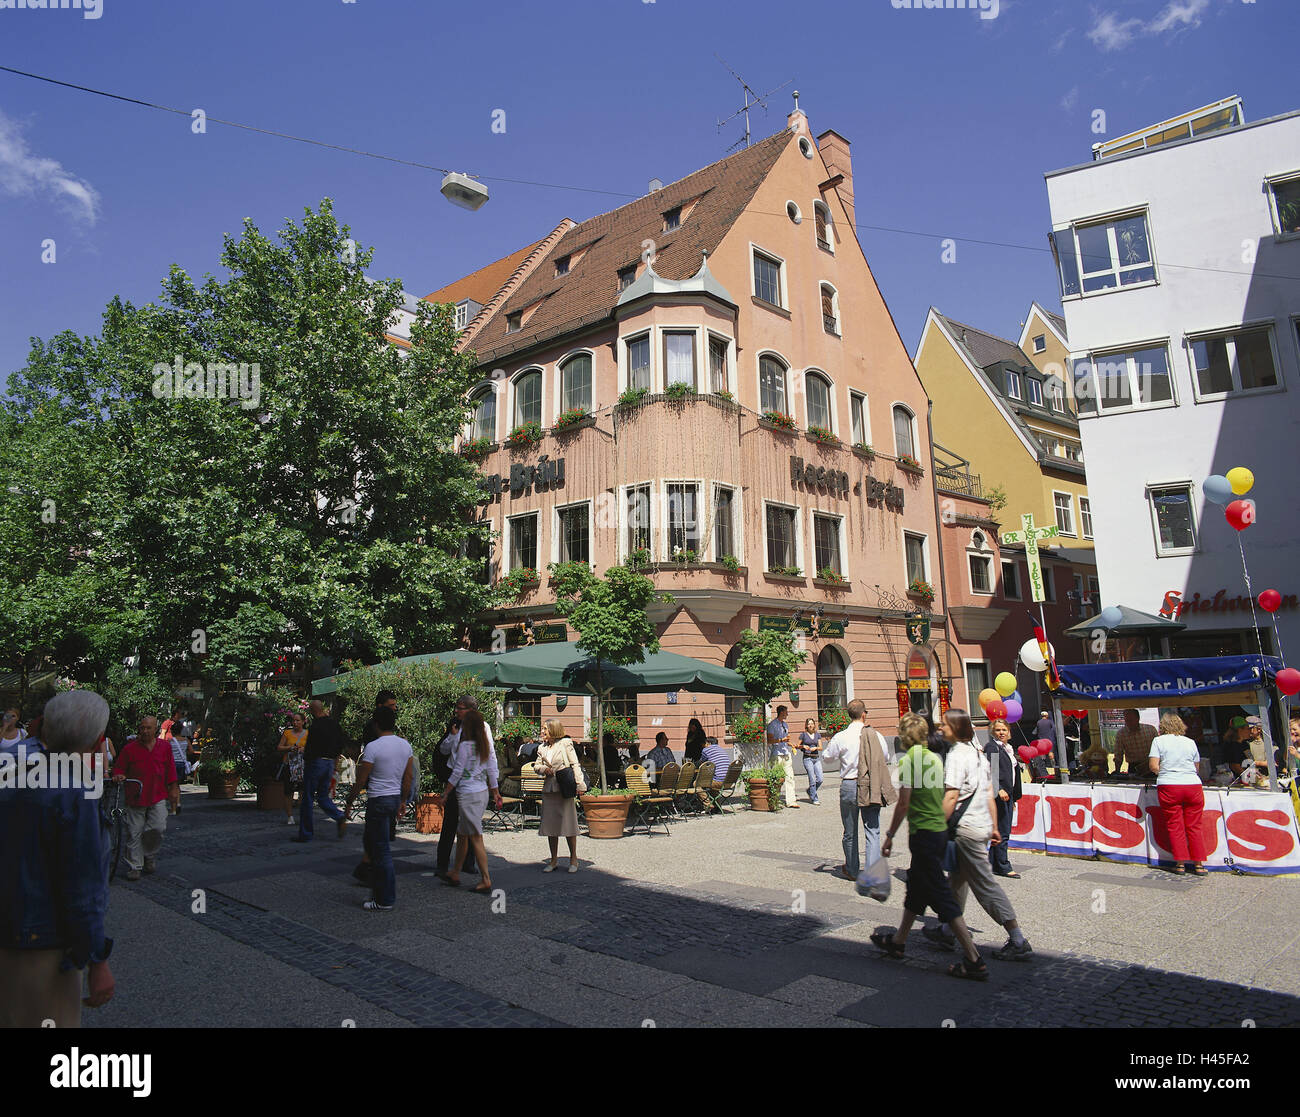 Germany, Bavaria, Augsburg, pedestrian area, Hasen-Bräu house, passer-by, Swabian, brewery, pedestrian, tourist, person, outside, heaven, houses, street cafe, tree, city centre, saunter, stroll, building, architecture, Stock Photo